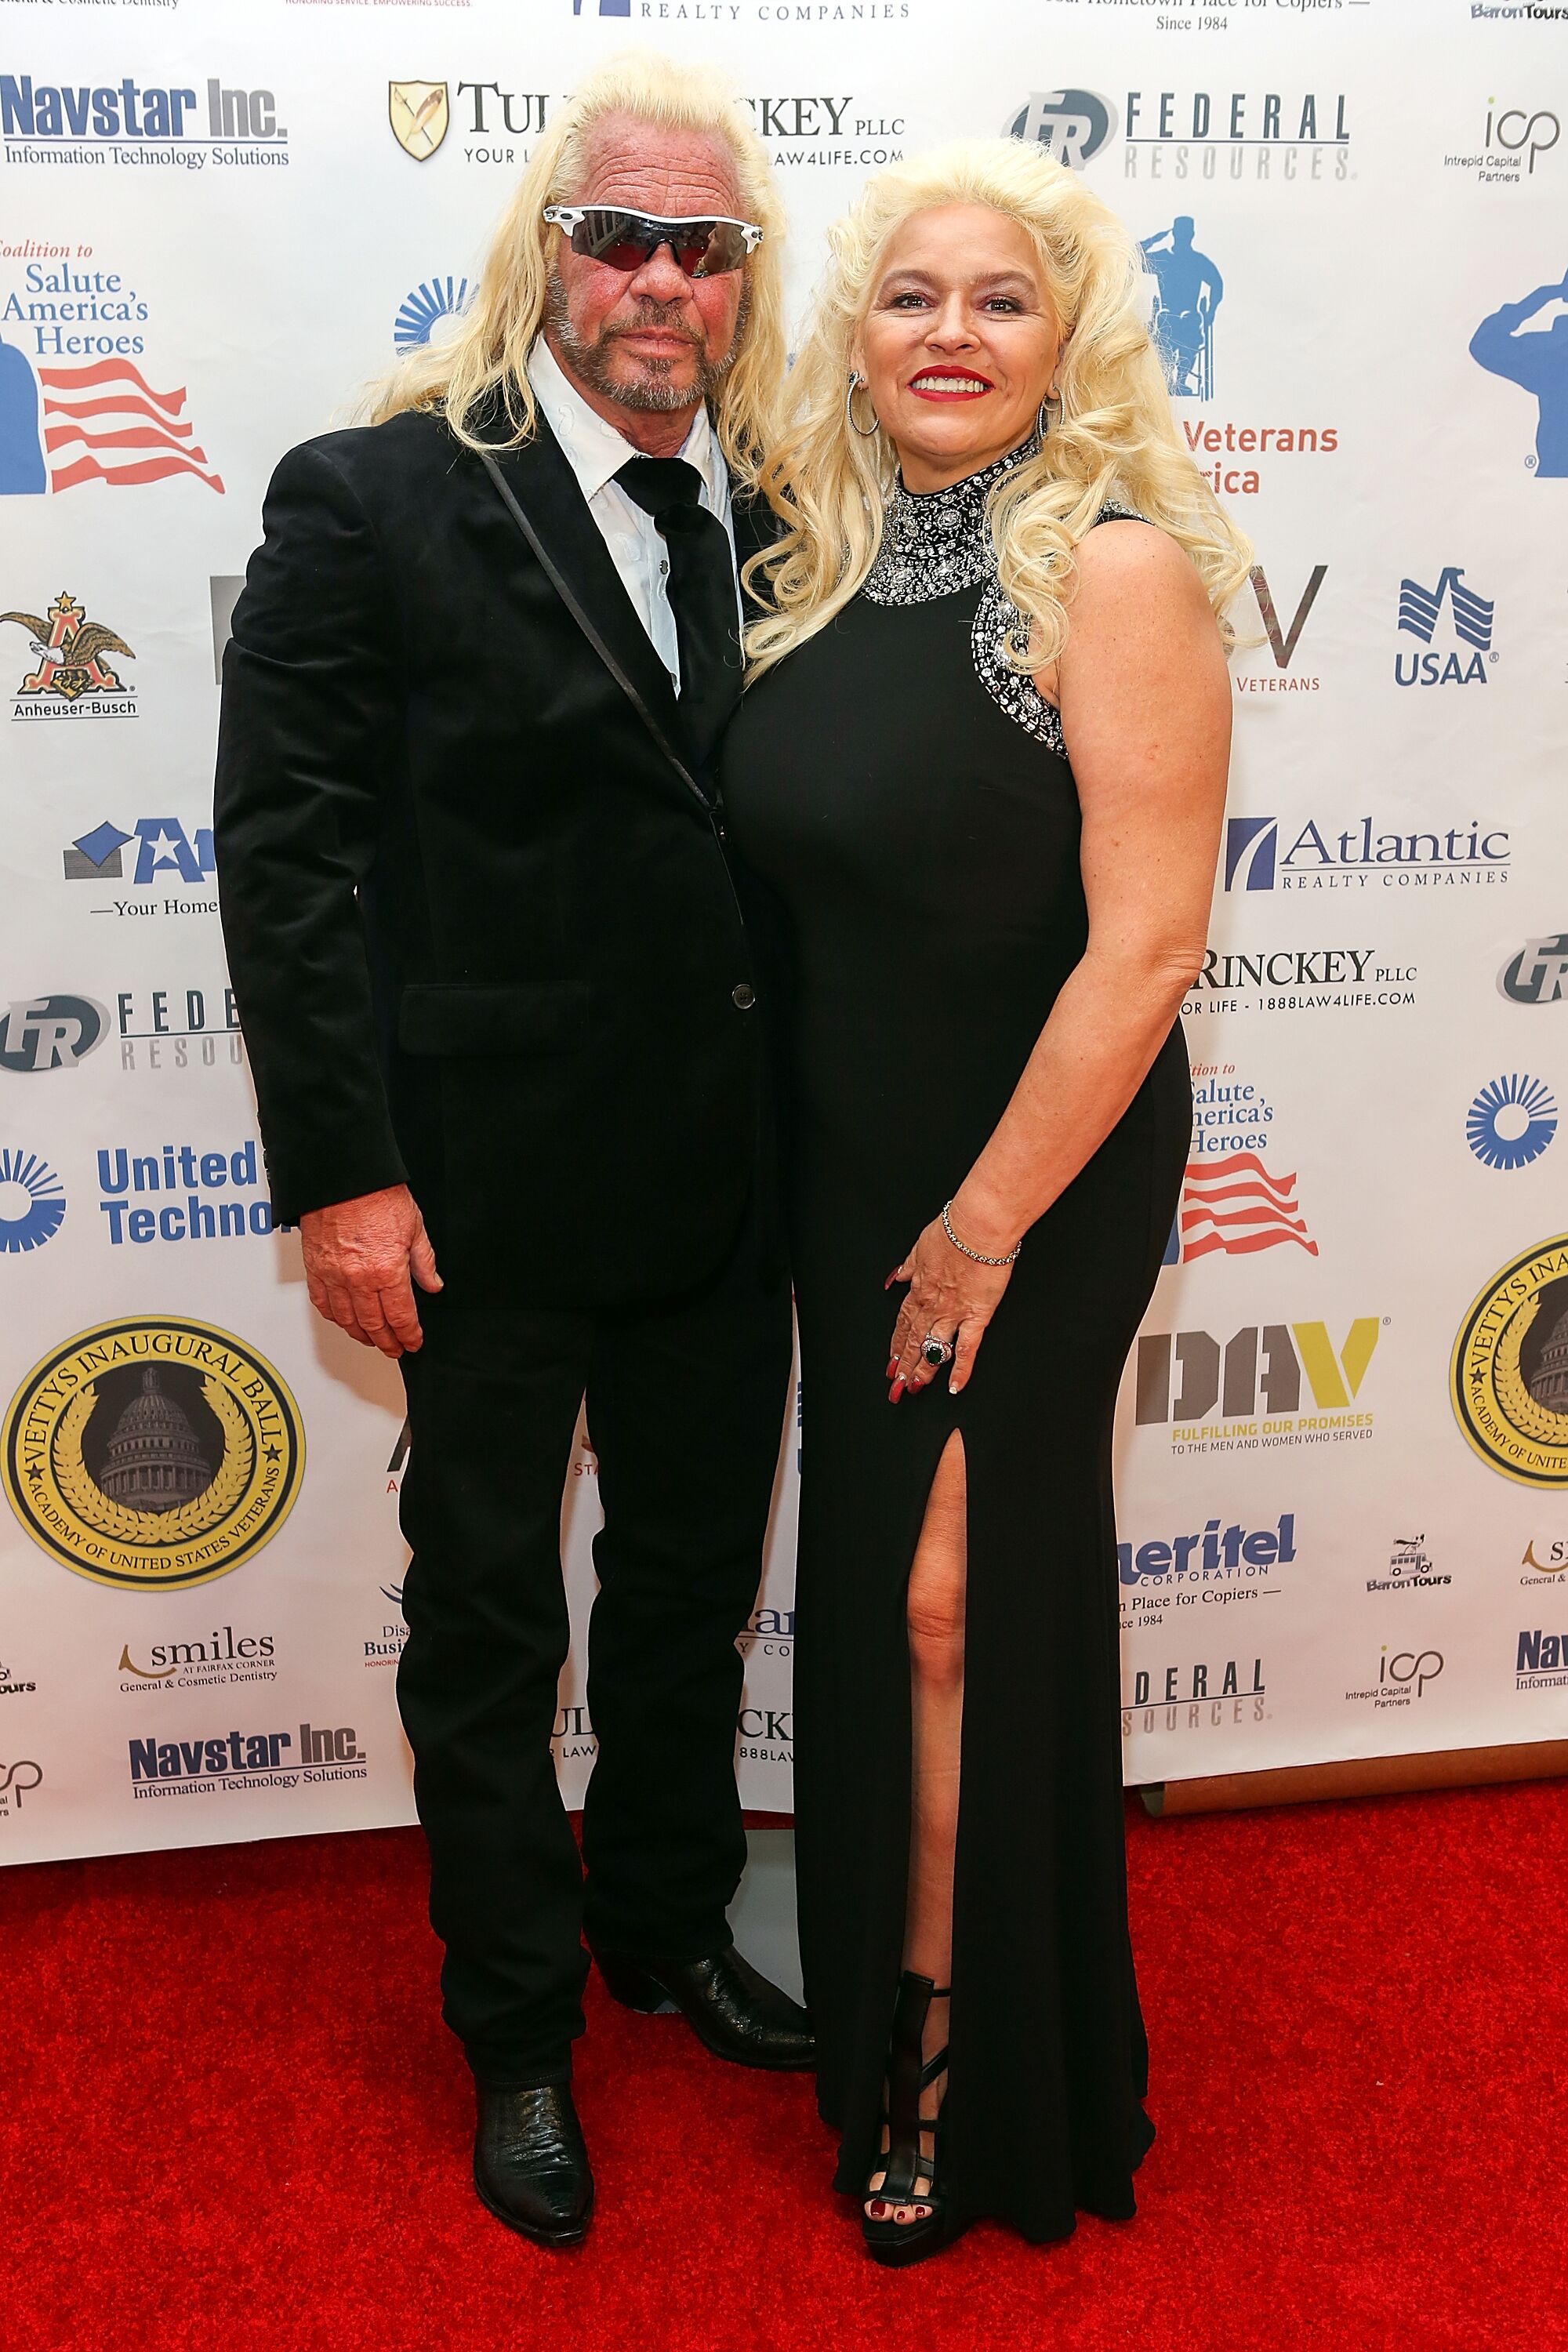 Duane Chapman and late Beth Chapman attended the Vettys Presidential Inaugural Ball at Hay-Adams Hotel on January 20, 2017 | Photo: Getty Images